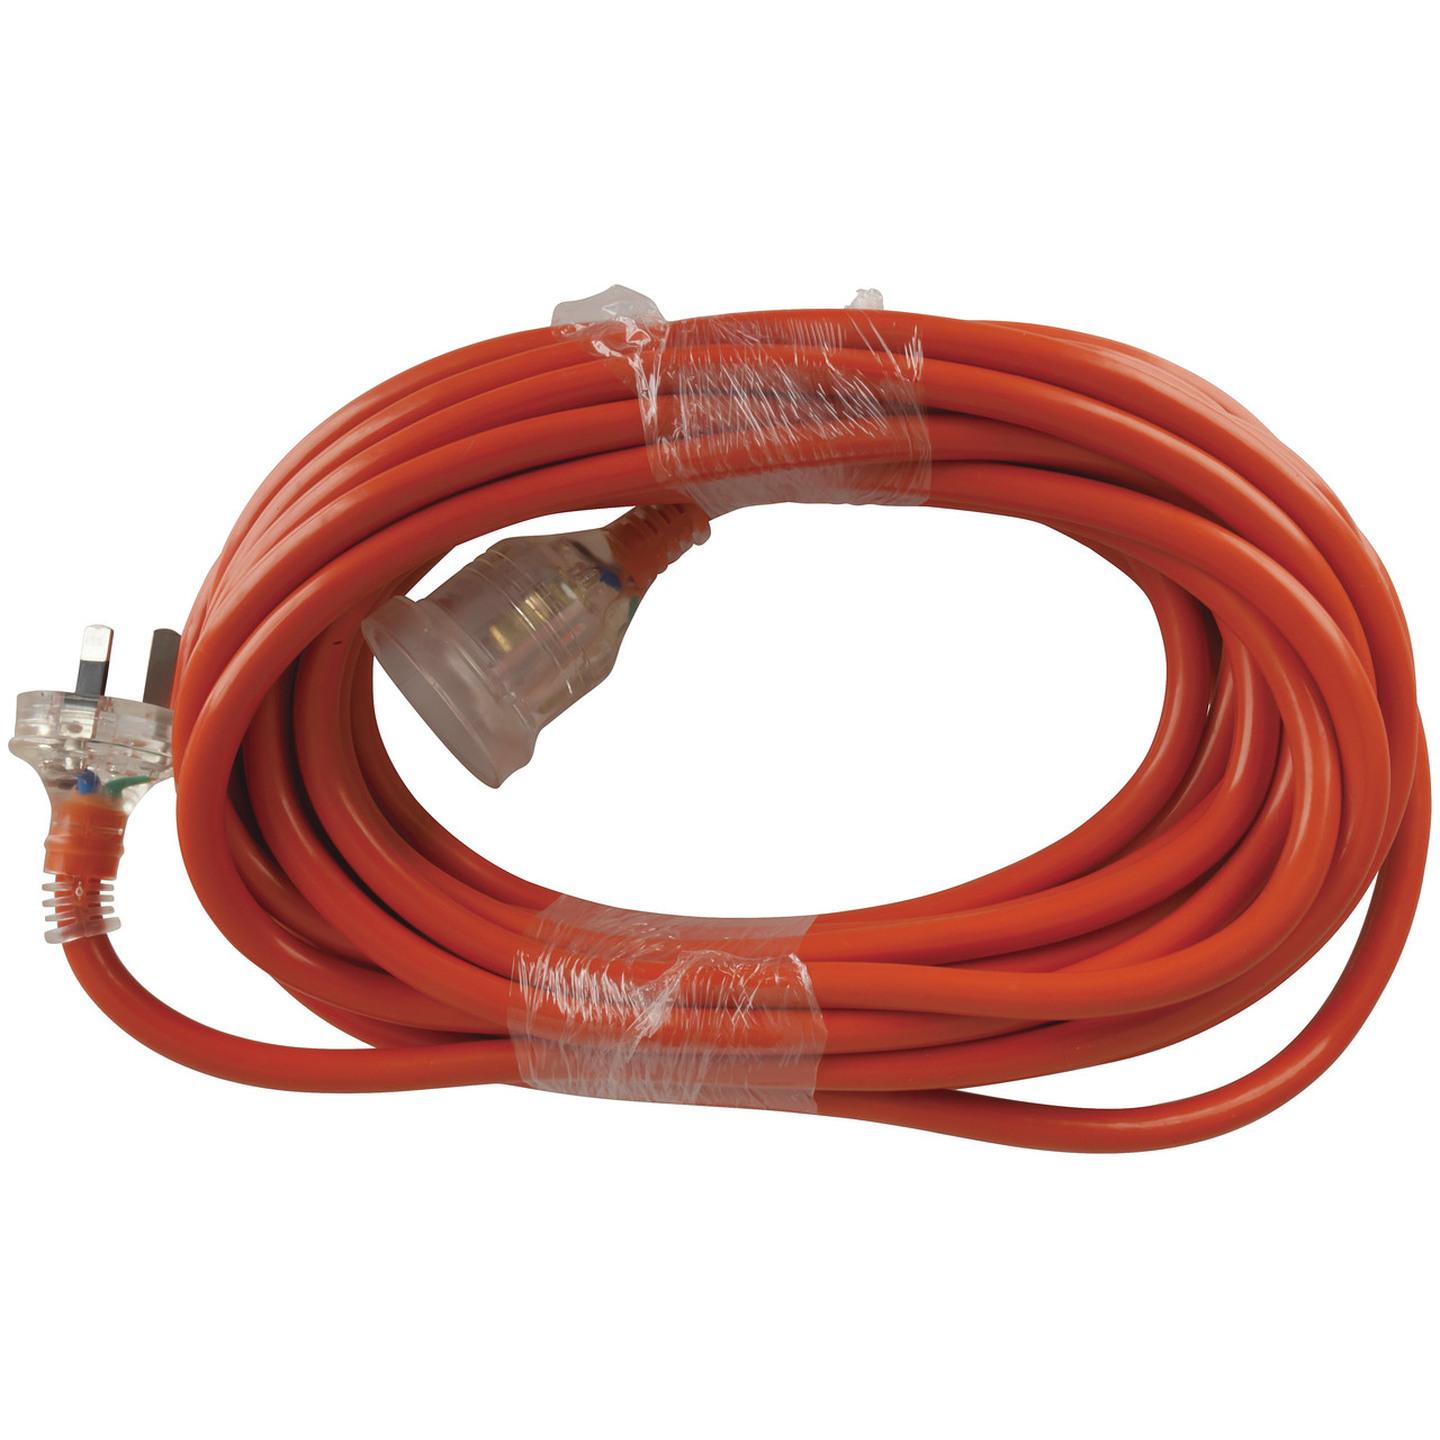 10m Heavy Duty Mains Extension Lead